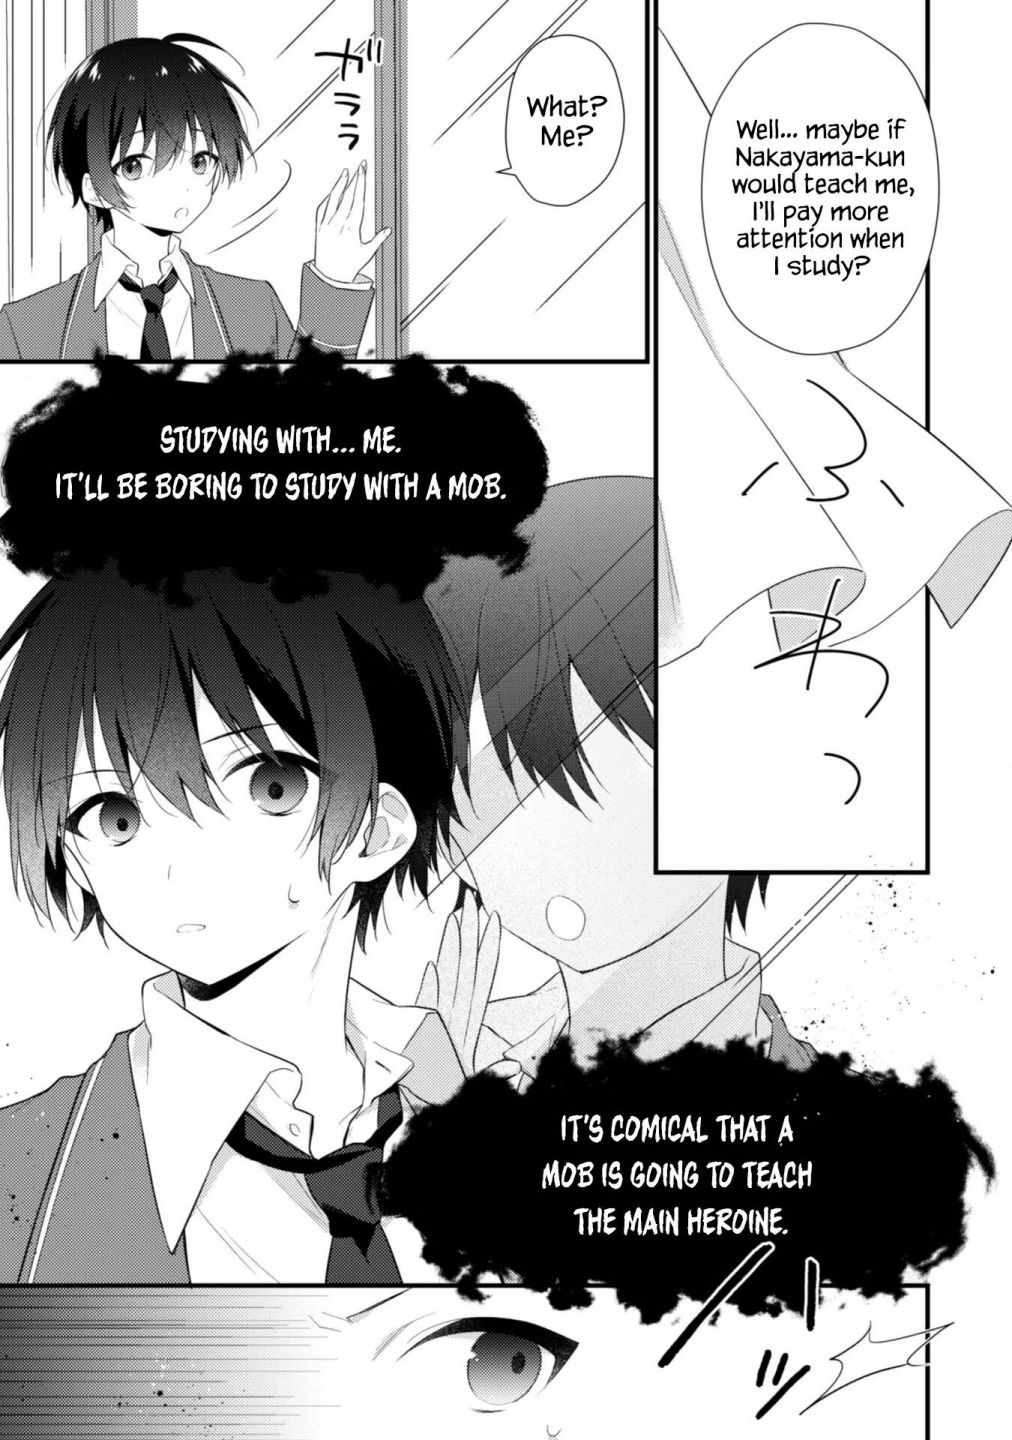 Shimotsuki-san Likes the Mob ~This Shy Girl is Only Sweet Towards Me~ Chapter 5-eng-li - Page 15